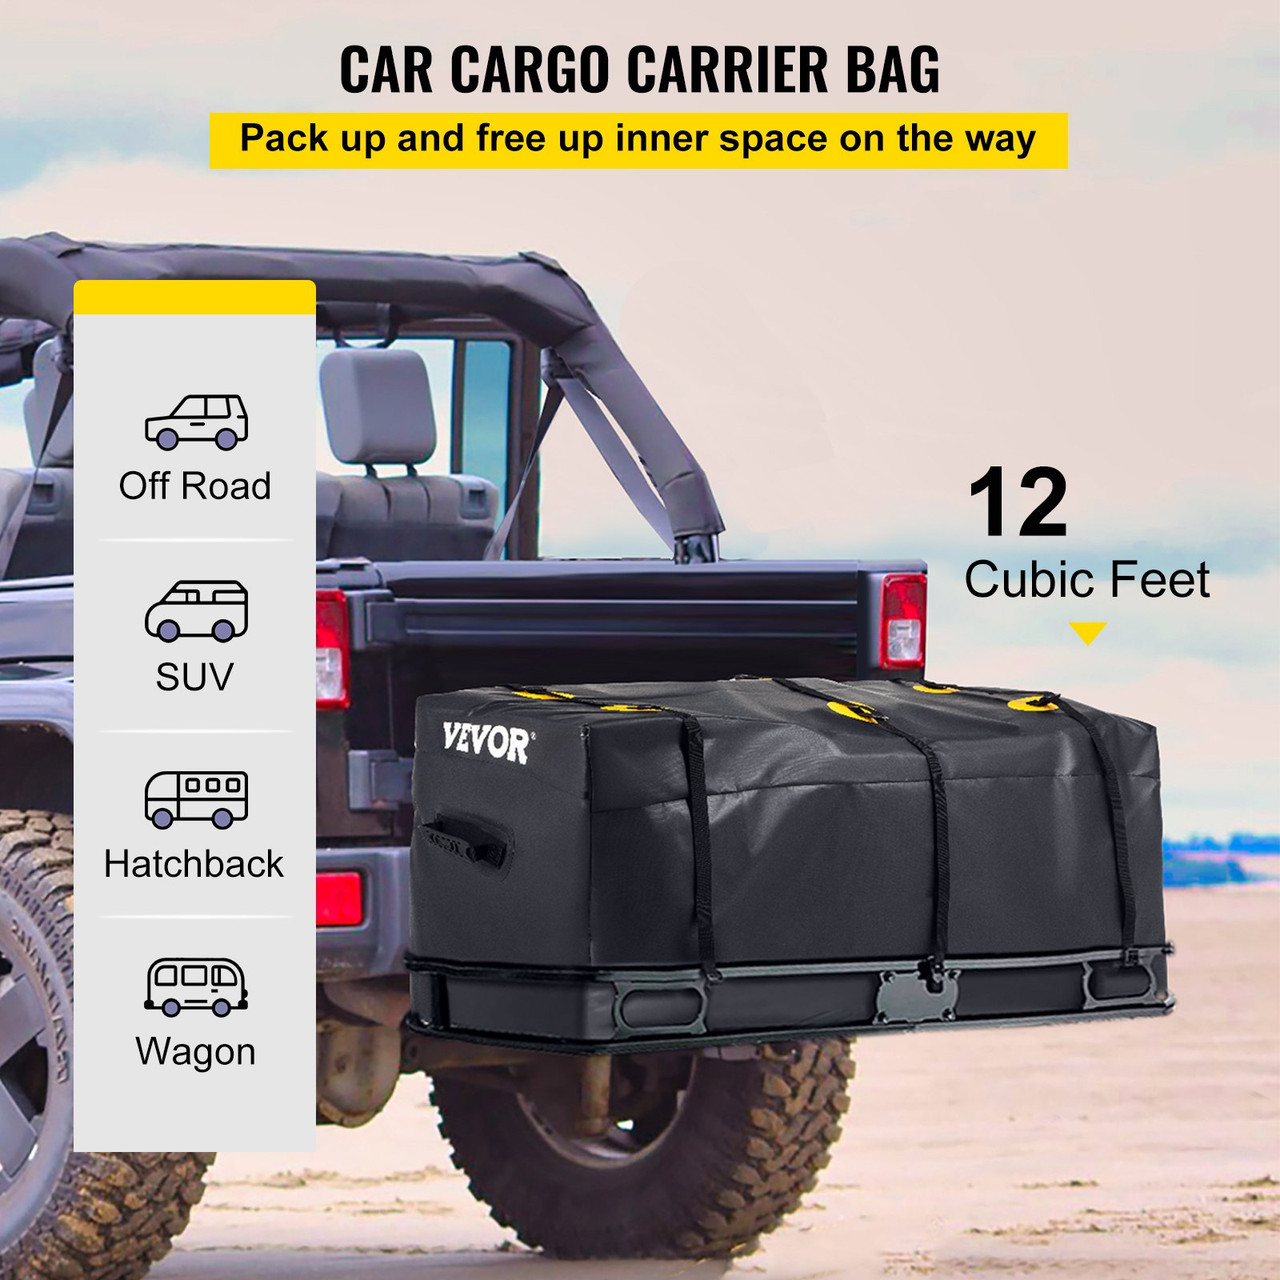 Hitch Cargo Carrier Bag, Waterproof 840D PVC, 48"x20"x22" (12 Cubic Feet), Heavy Duty Cargo Bag for Hitch Carrier with Reinforced Straps, Fits Car Truck SUV Vans Hitch Basket